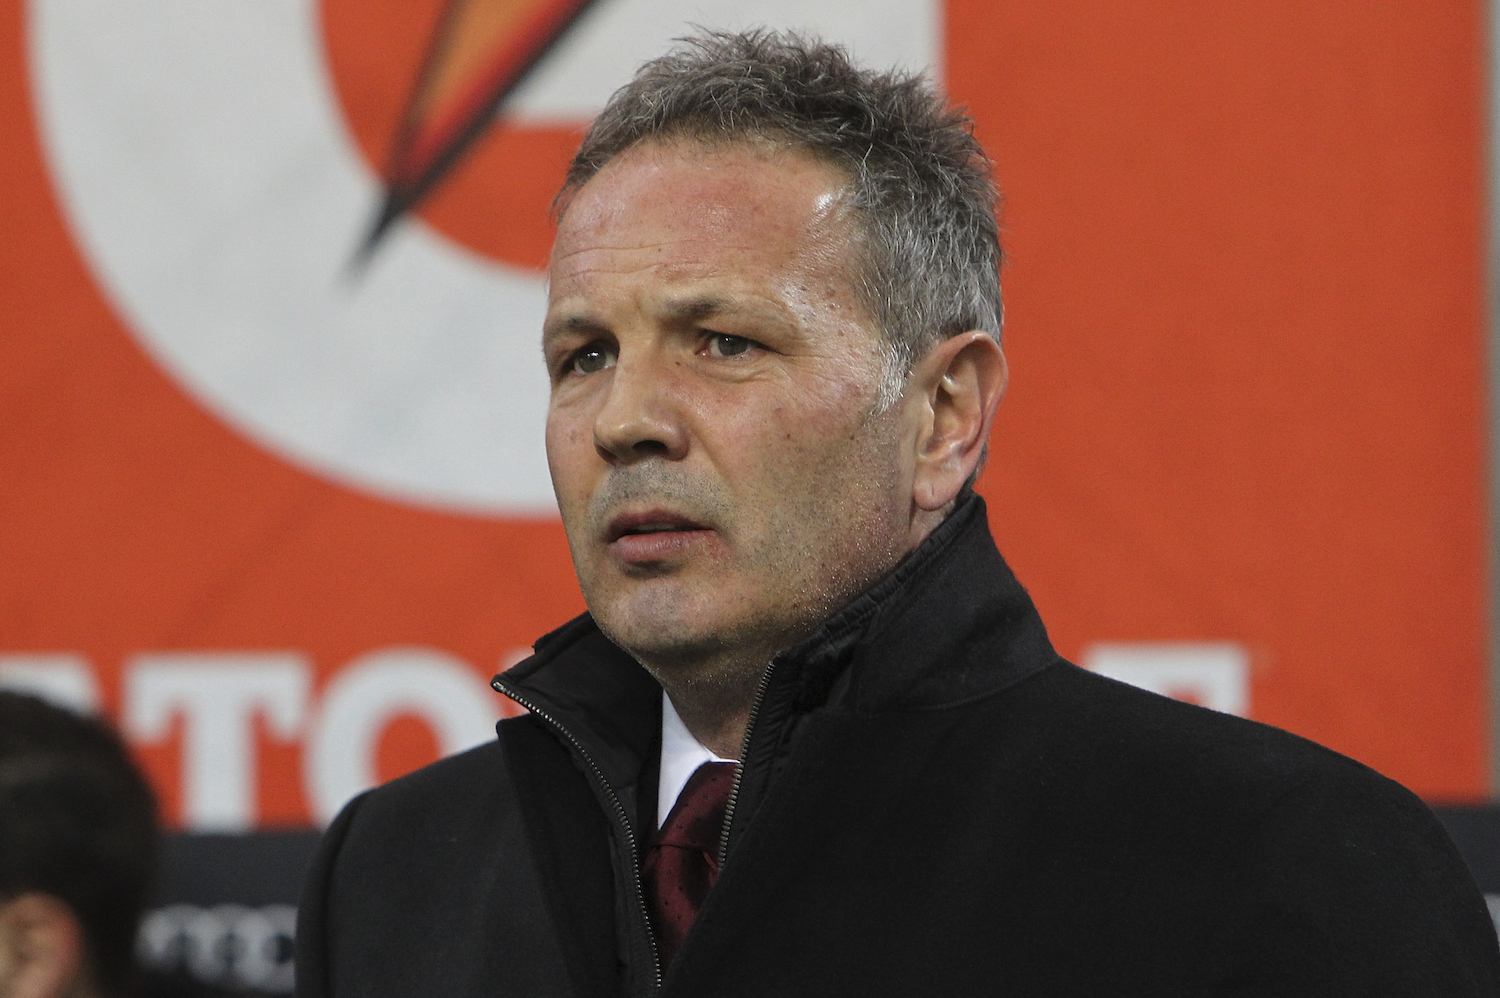 Mihajlovic frustrated his side couldn't win. | Marco Luzzani/Getty Images